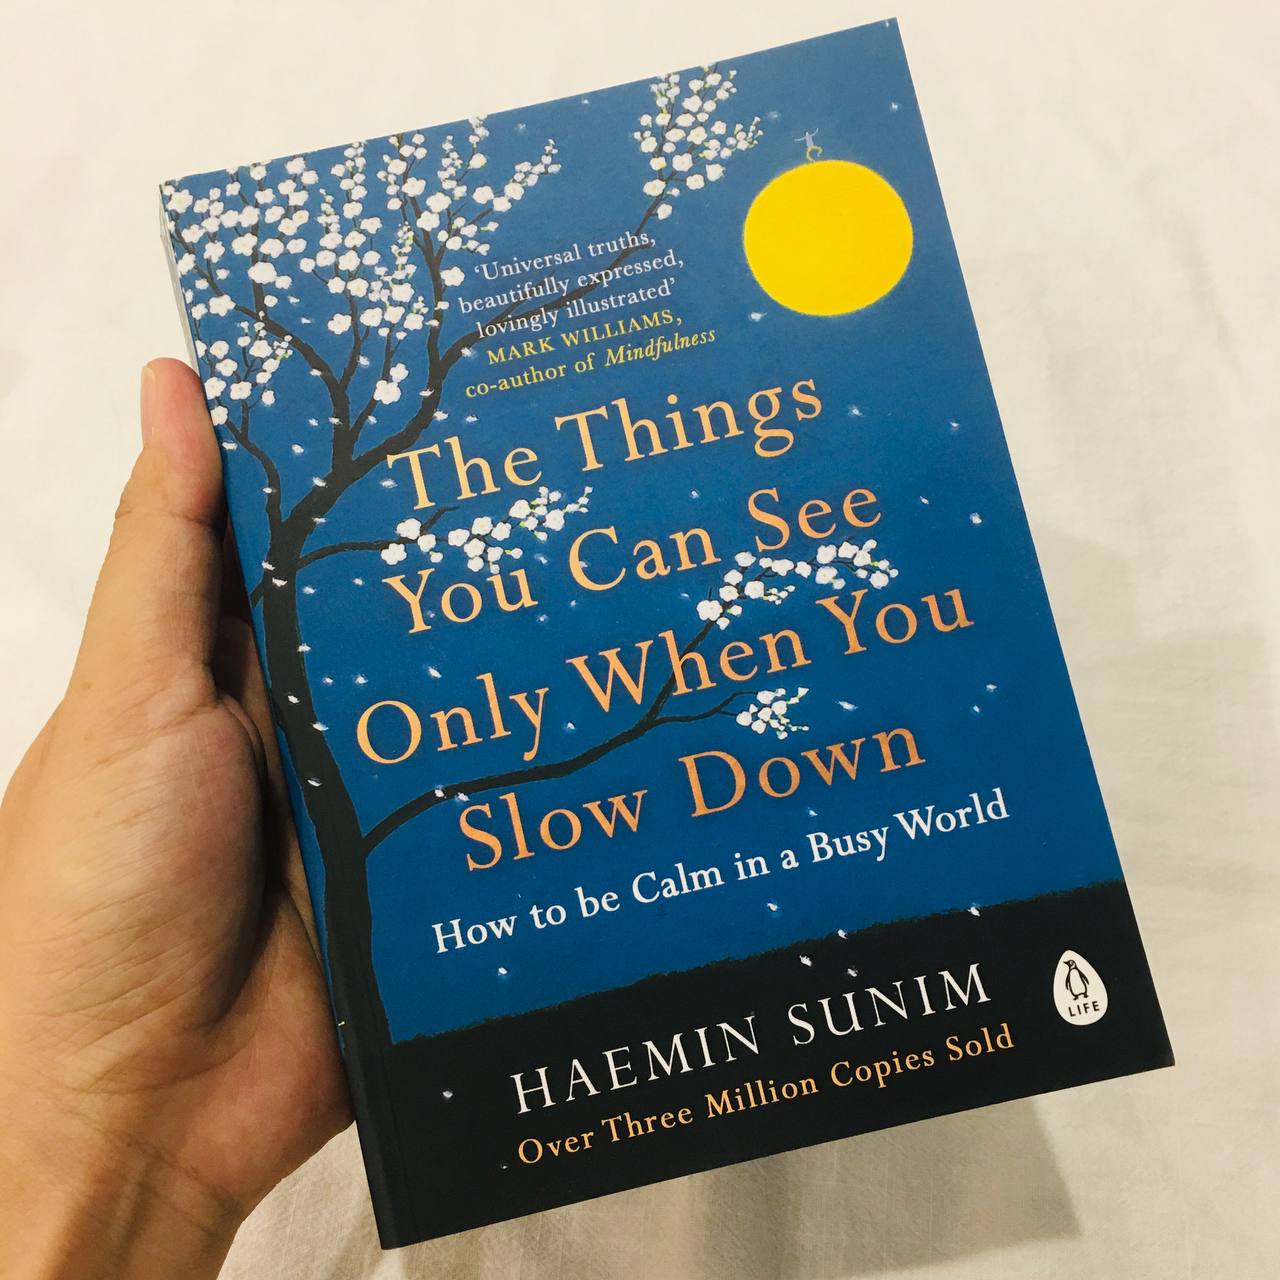 Sách The Things You Can See Only When You Slow Down: How to be Calm in a Busy World by Haemin Sunim